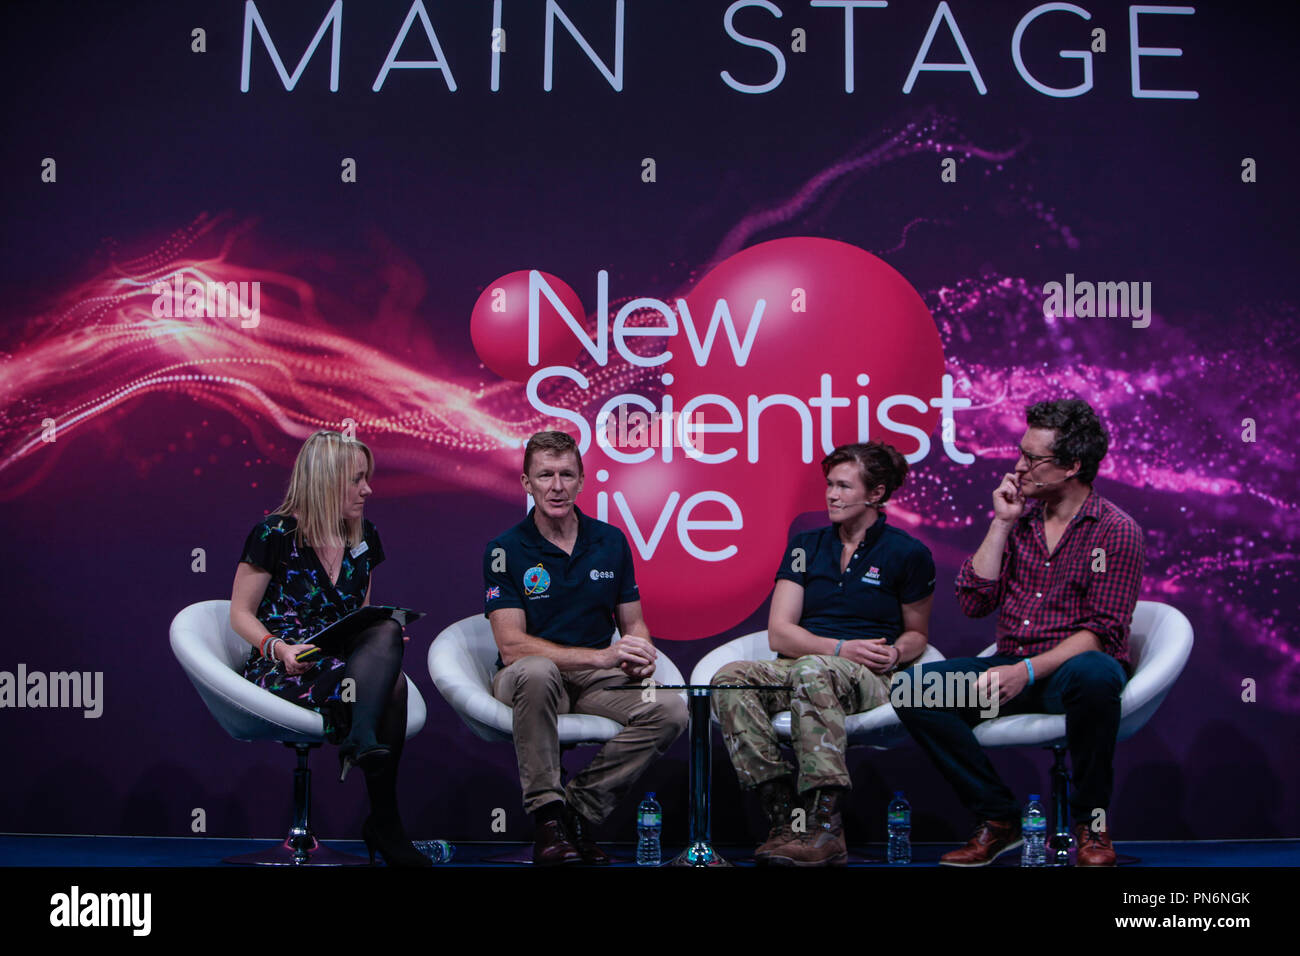 London 20 September 2018 New Scientis Live 2018 Main stage welcomed Tim Peake, European Space Agency (ESA) astronaut of British nationality. He finished his 186-day Principia mission working on the International Space Station for Expedition 46/47 when he landed back on Earth 18 June 2016. Tim has a background as a test pilot and a British Army Air Corps officer@Paul Quezada-Neiman/Alamy Live News Stock Photo